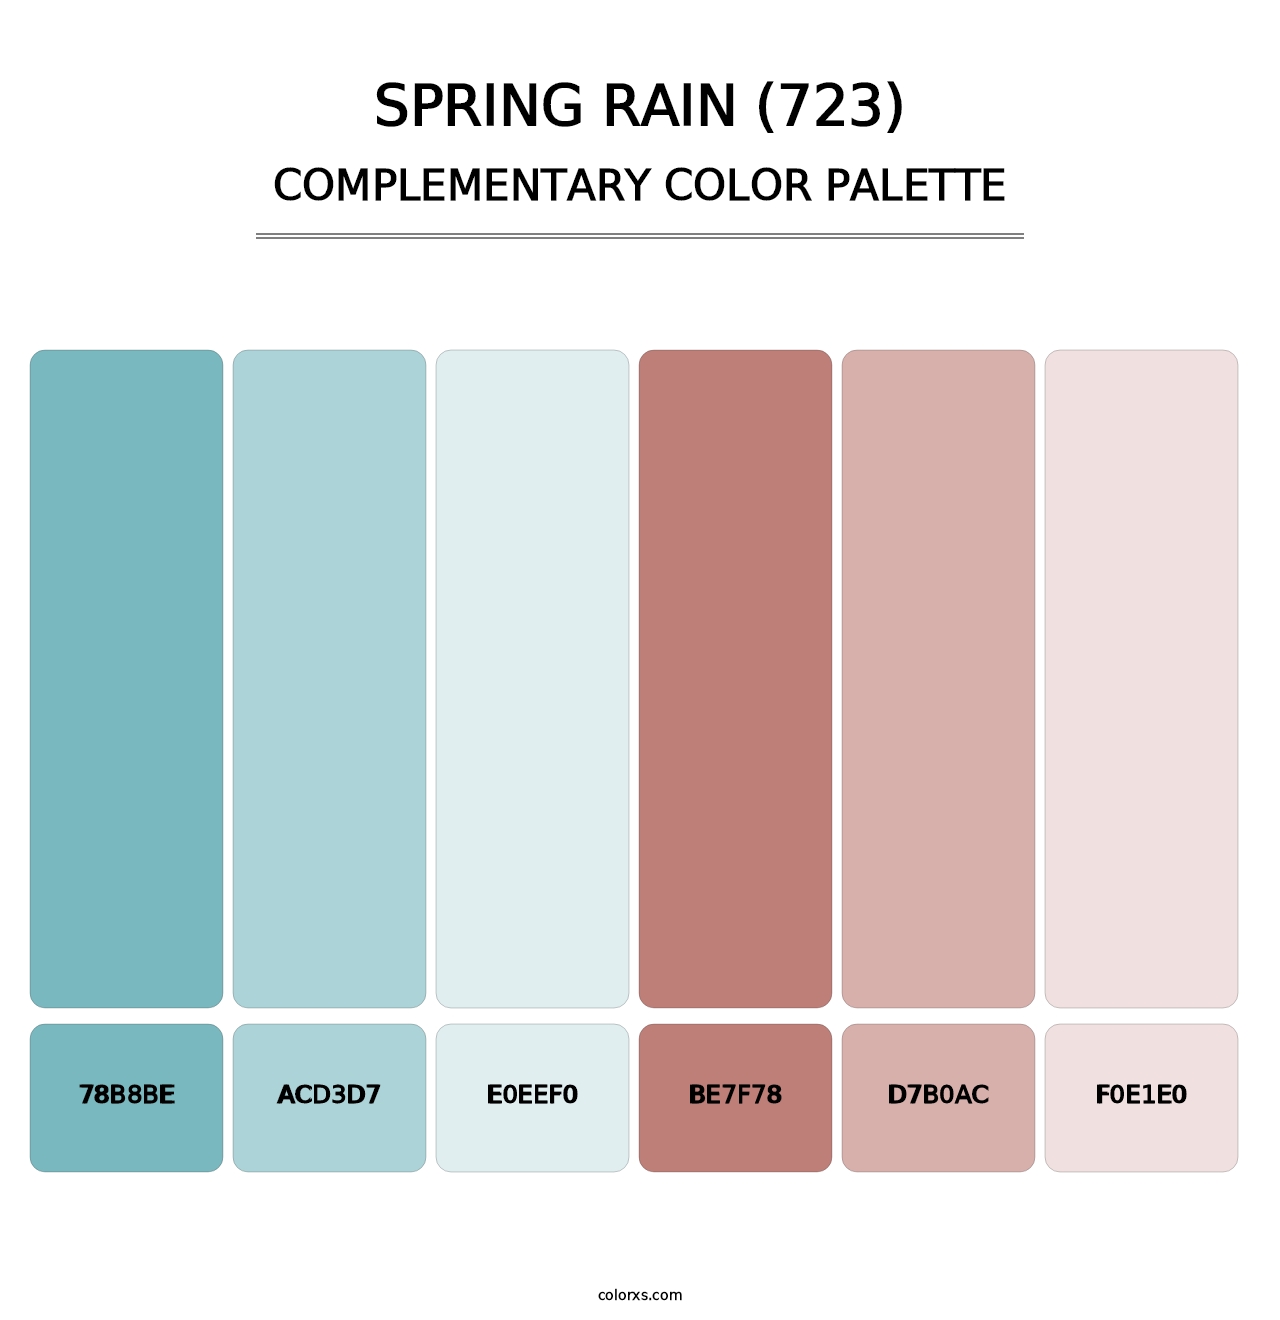 Spring Rain (723) - Complementary Color Palette